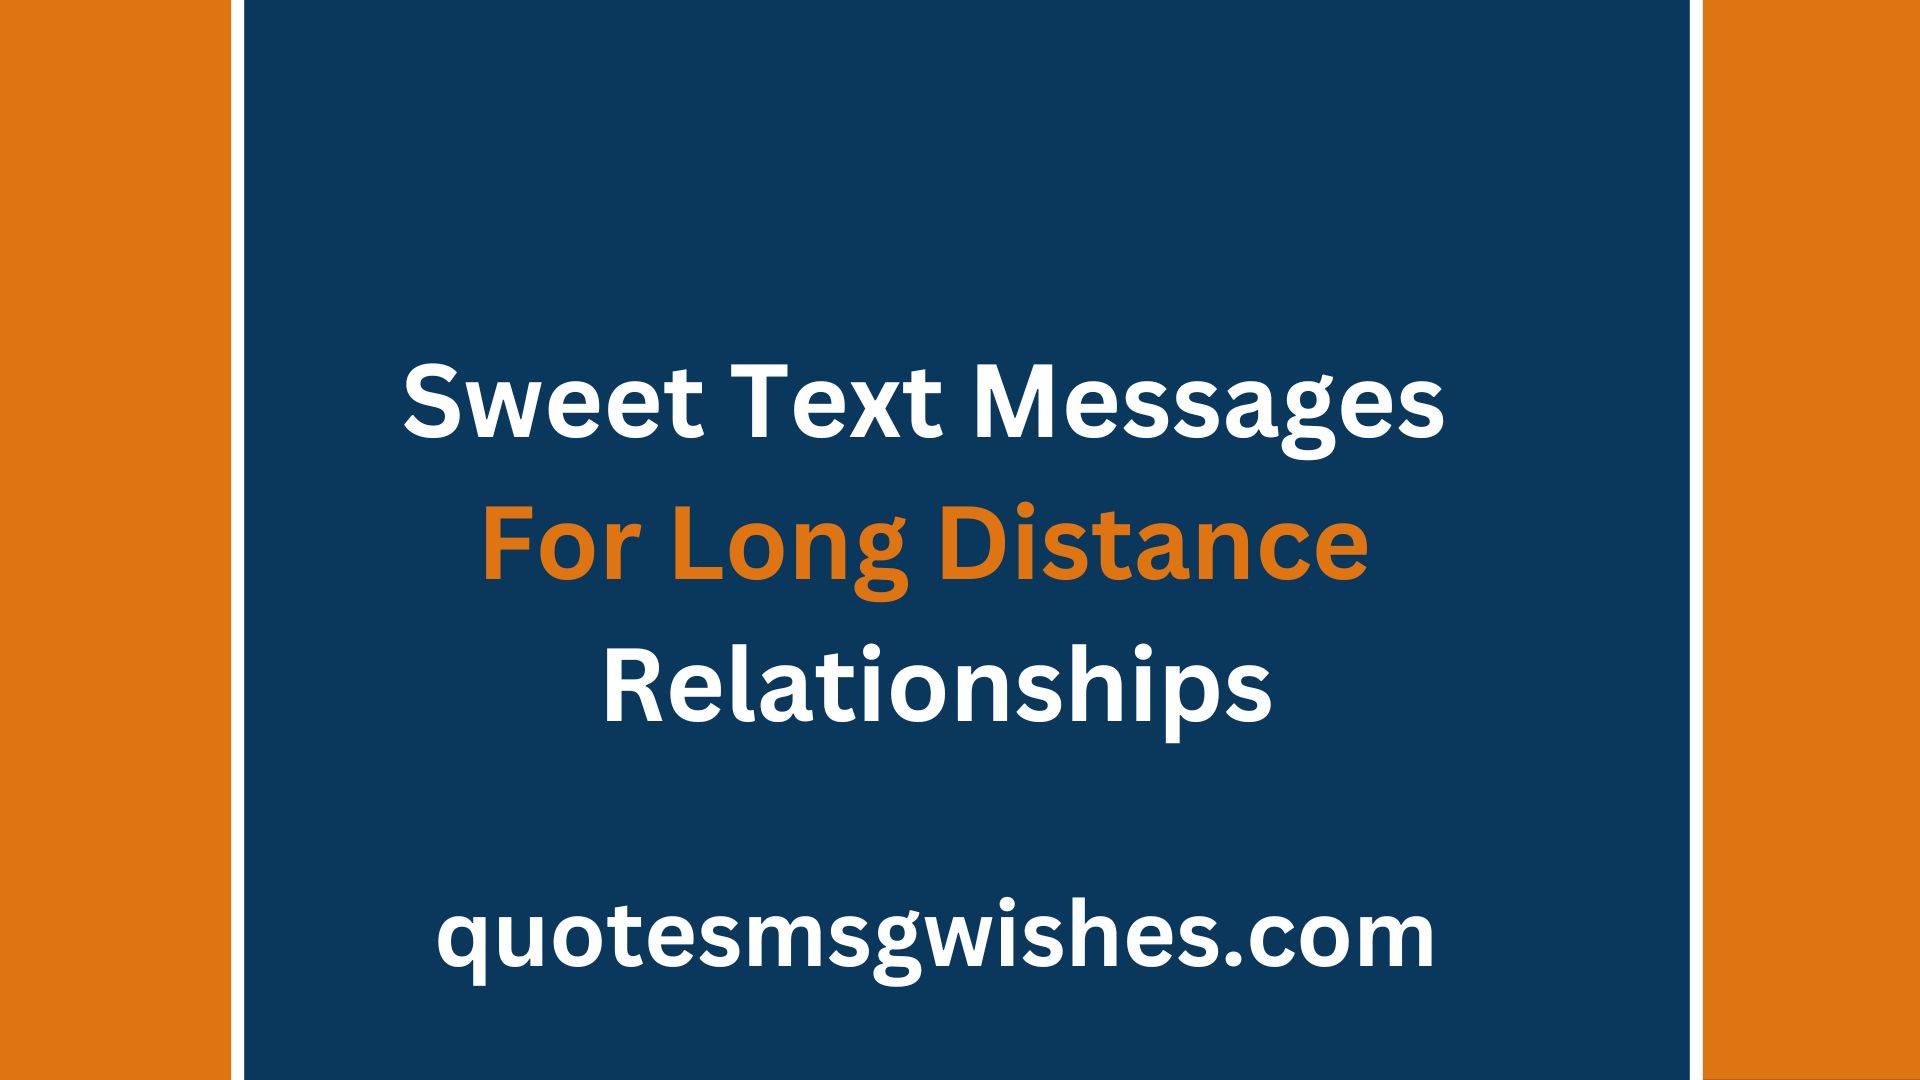 Sweet Text Messages For Long Distance Relationships